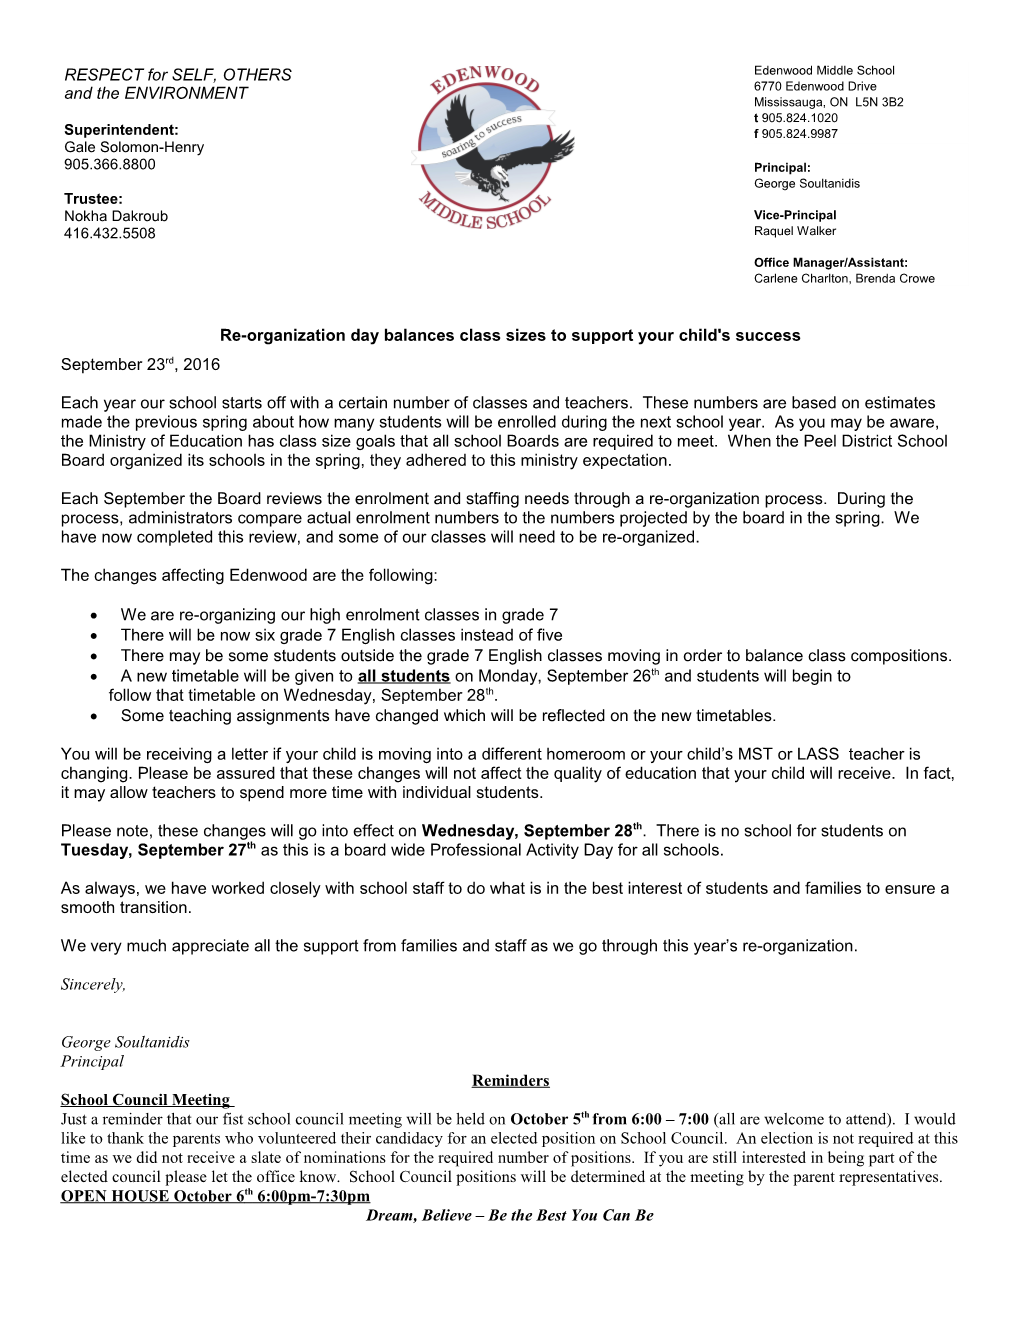 Reorganization Day Letter to Parents